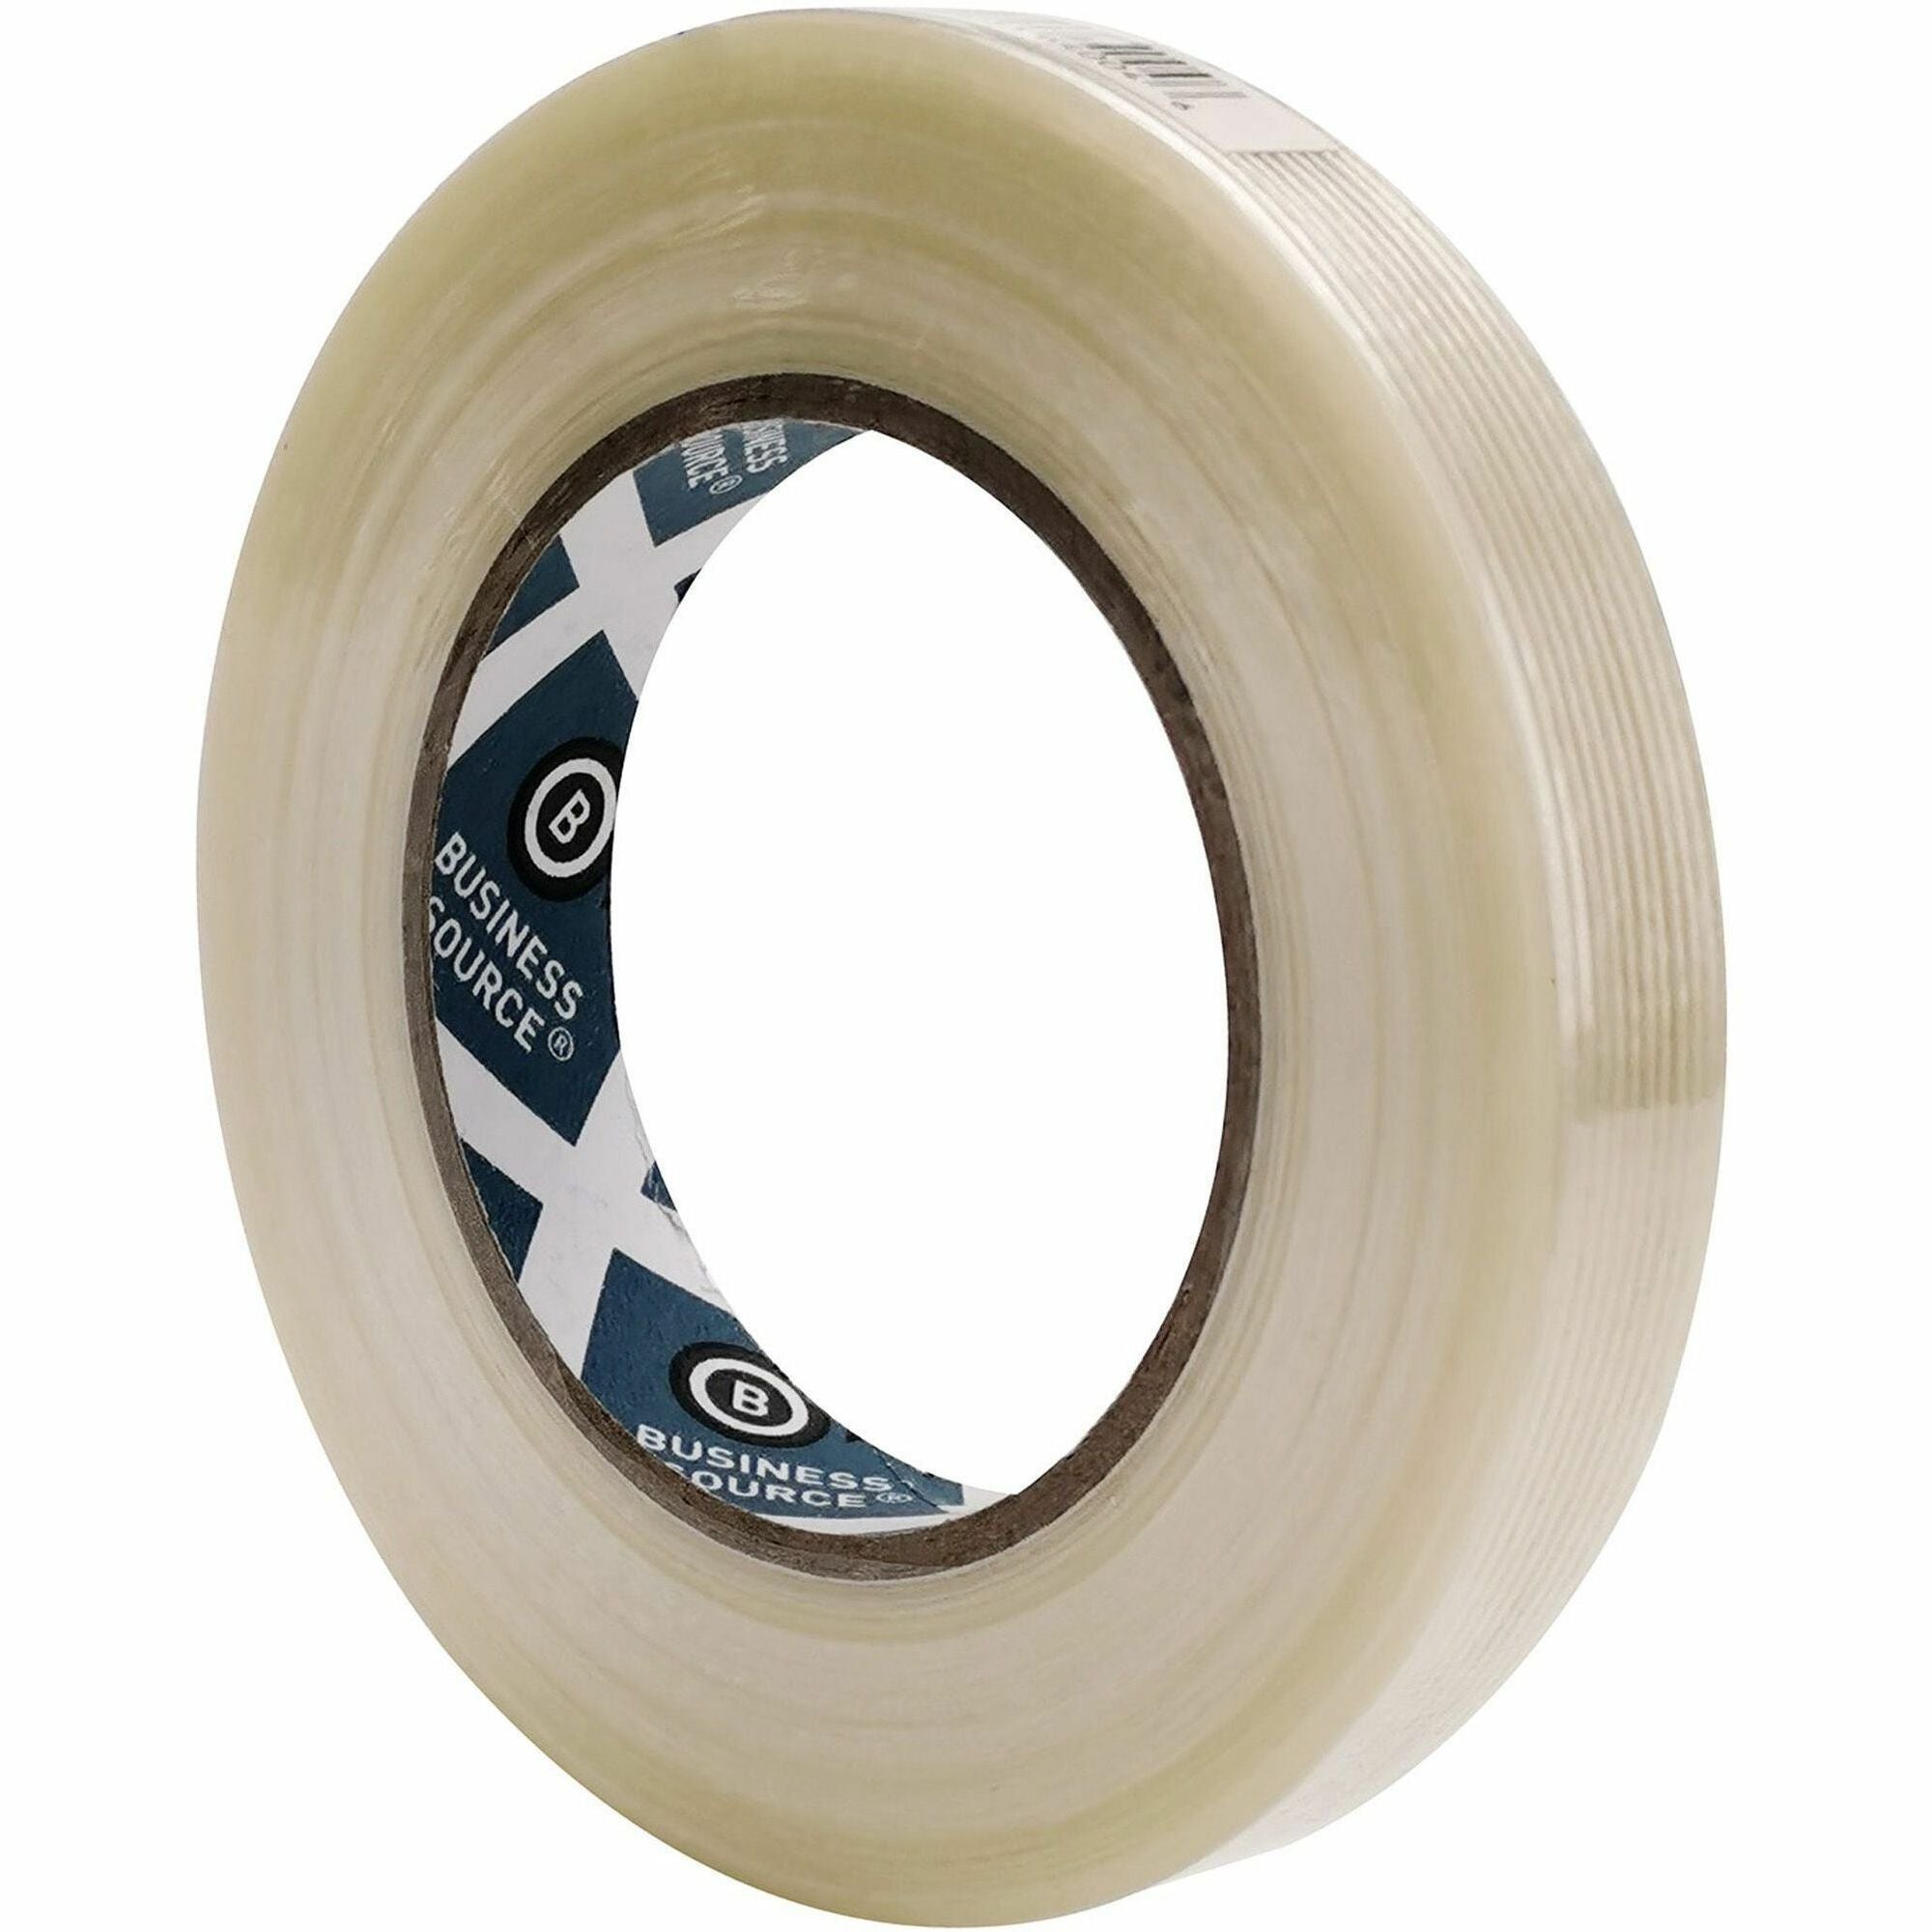 Business Source Filament Tape - 60 yd Length x 0.75" Width - 3" Core - Fiberglass Filament - For Reinforcing - 1 / Roll - White